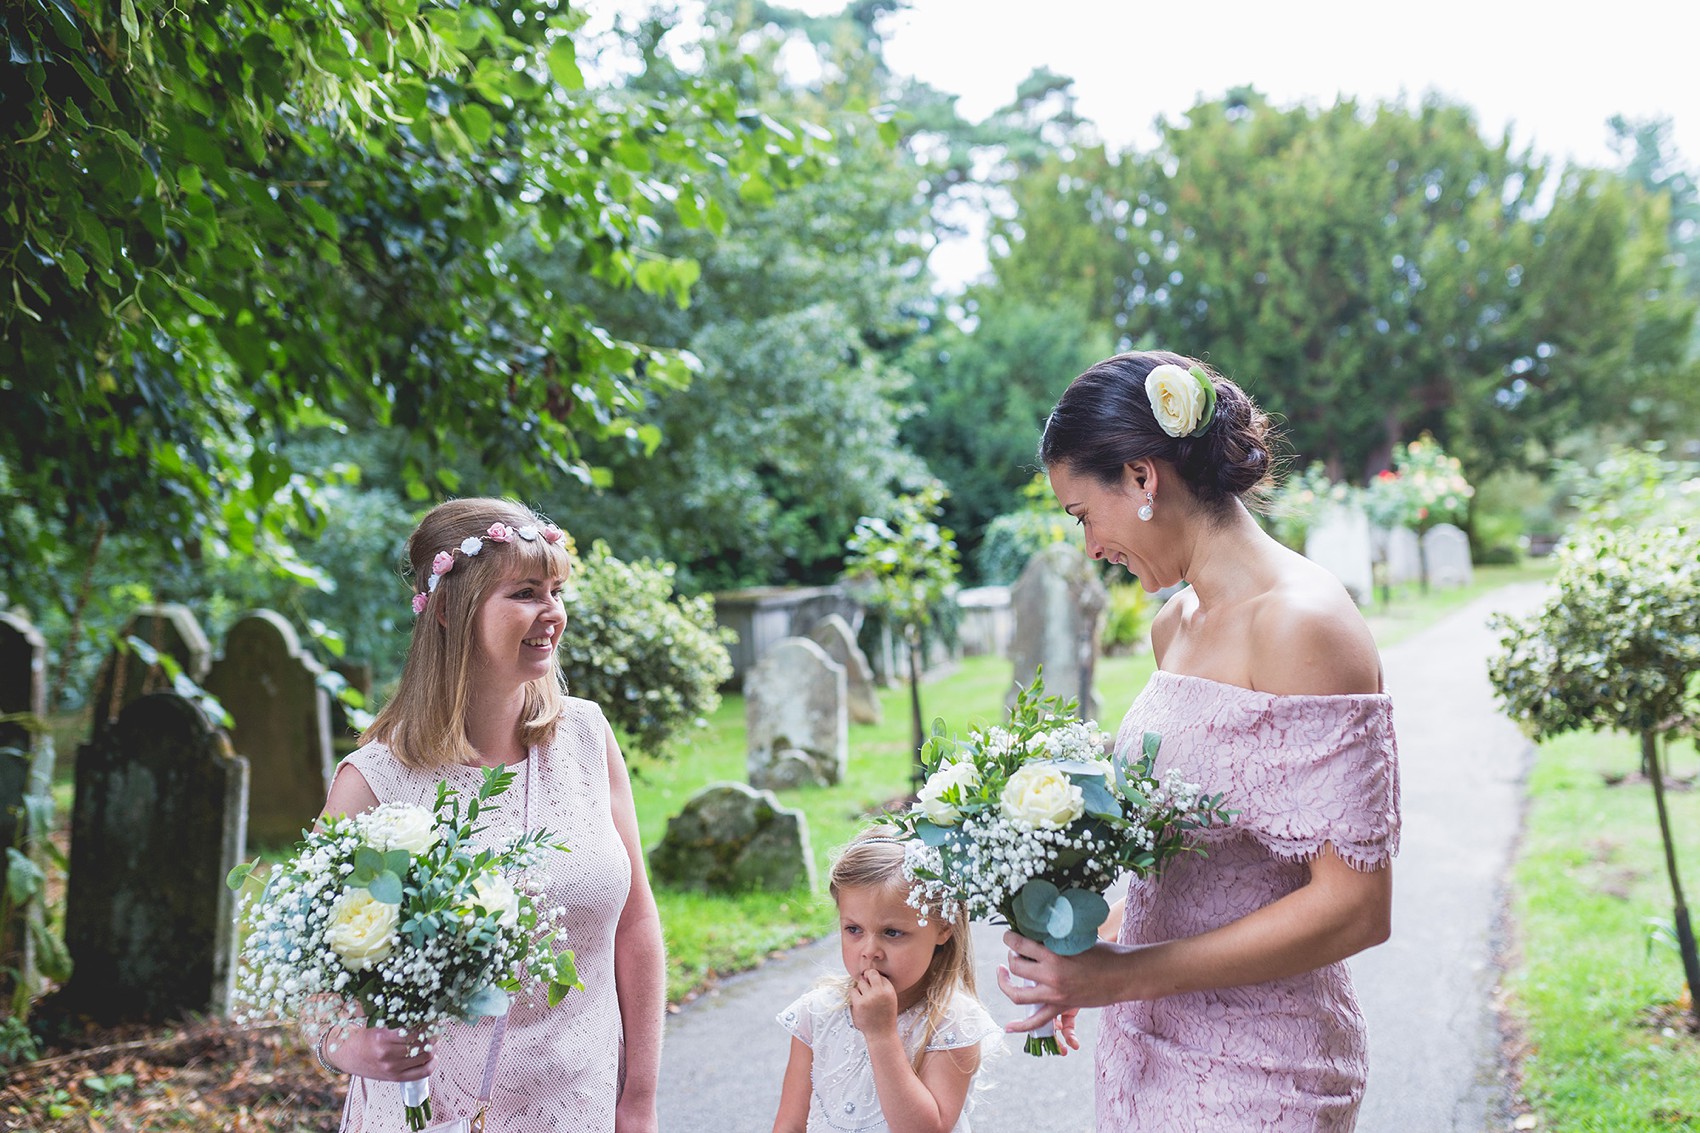 Temperley London bride - A Bride in Temperley London For A Classic Country House Summer Wedding